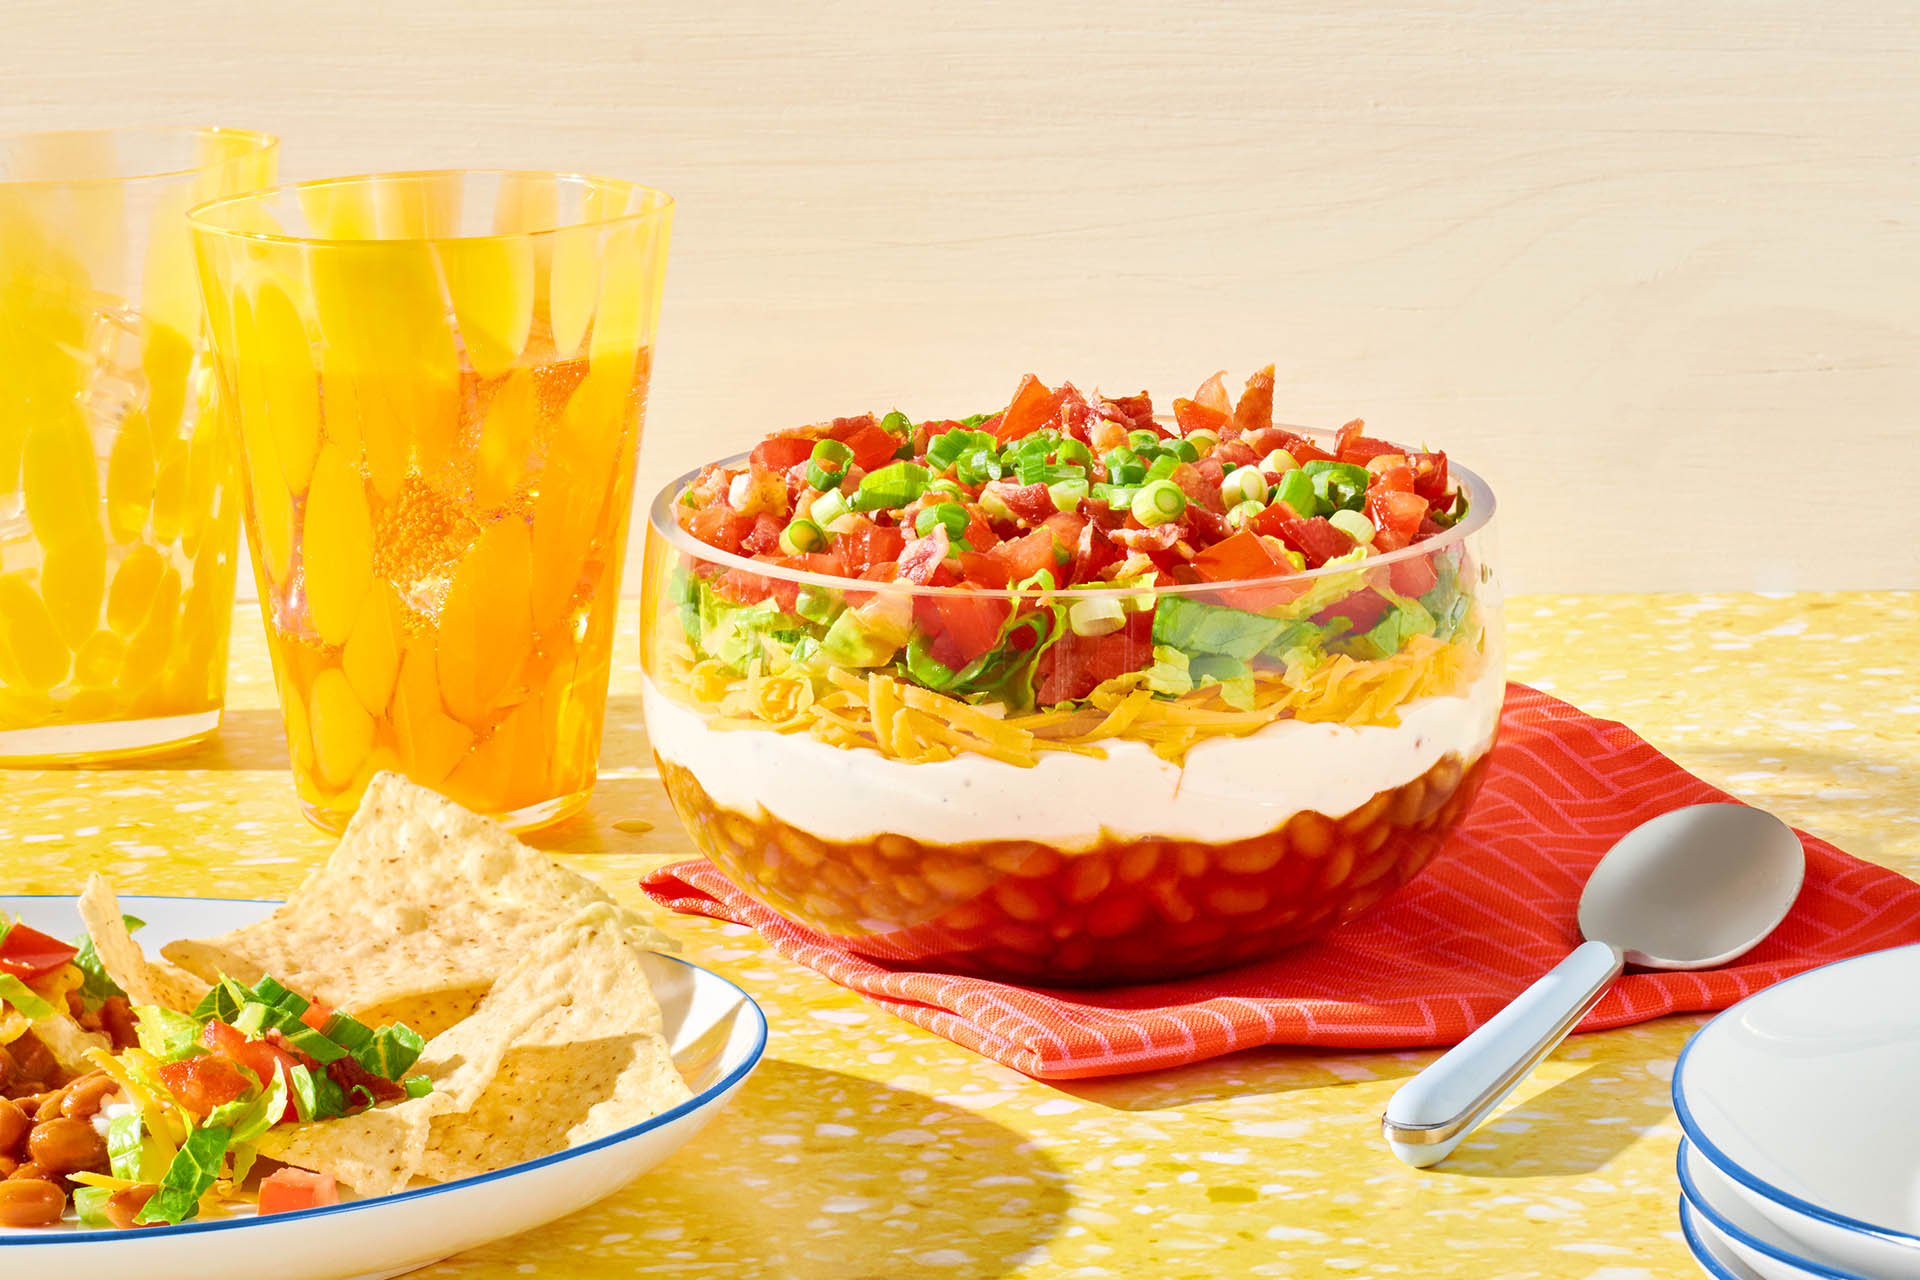 A bowl of layered bean dip on a red napkin next cups.